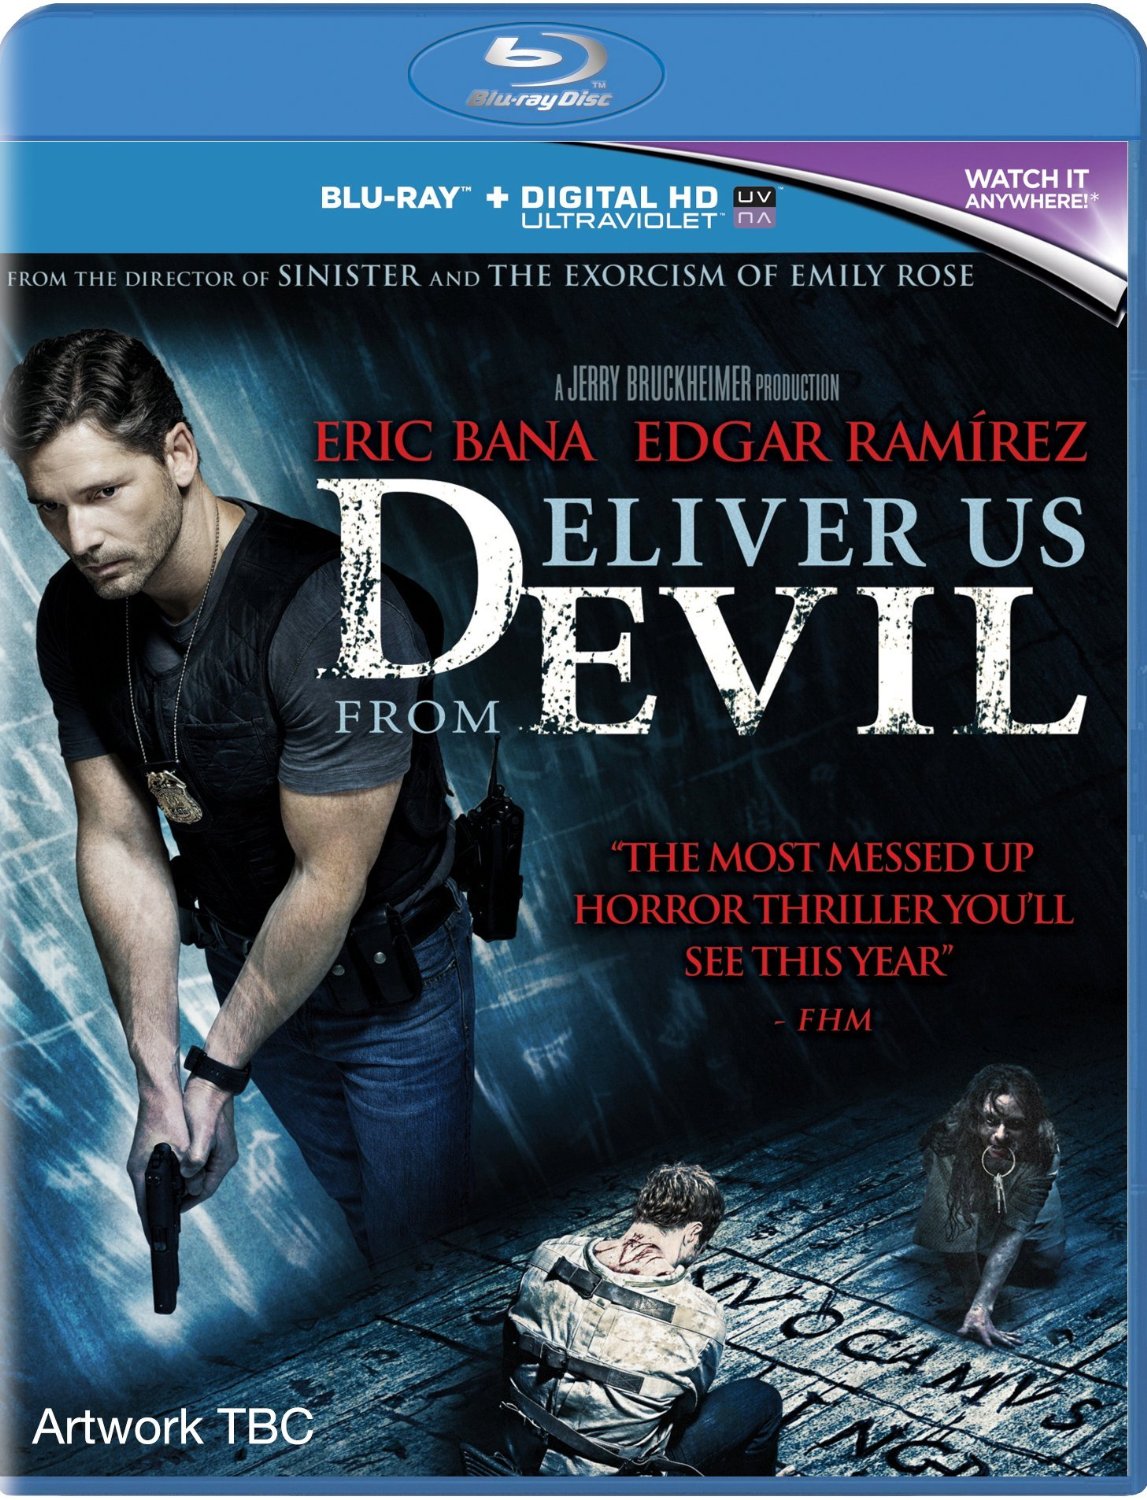 Scott Derrickson’s DELIVER US FROM EVIL comes to DVD and Blu-ray 5th ...